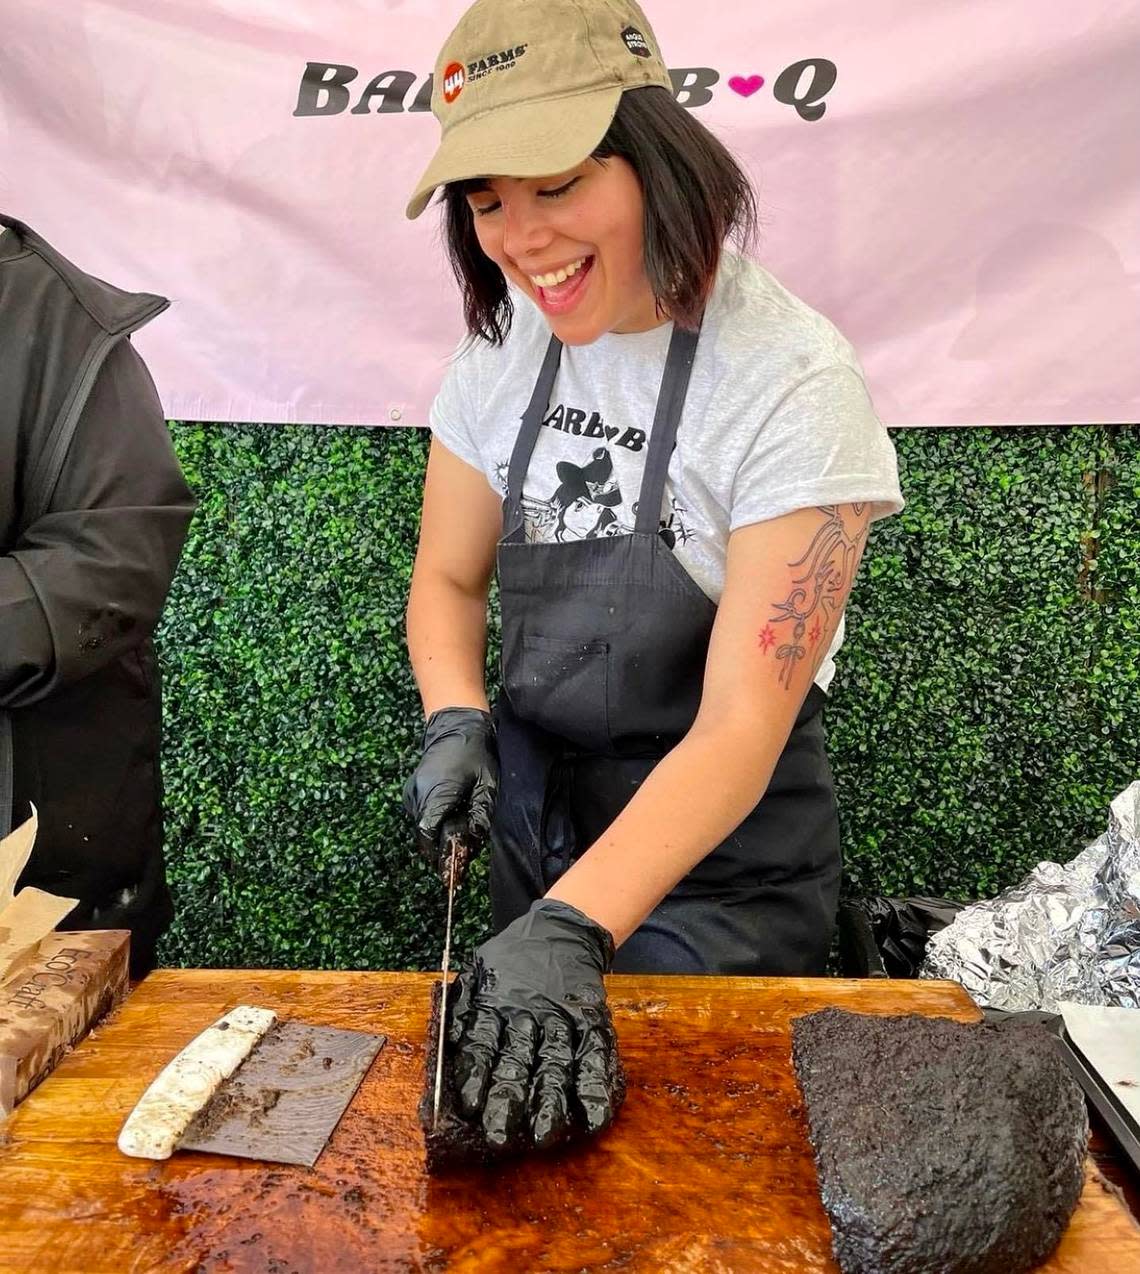 Pitmaster Chuck Charnichart hosts pop-ups of her own work at Goldee’s Barbecue.